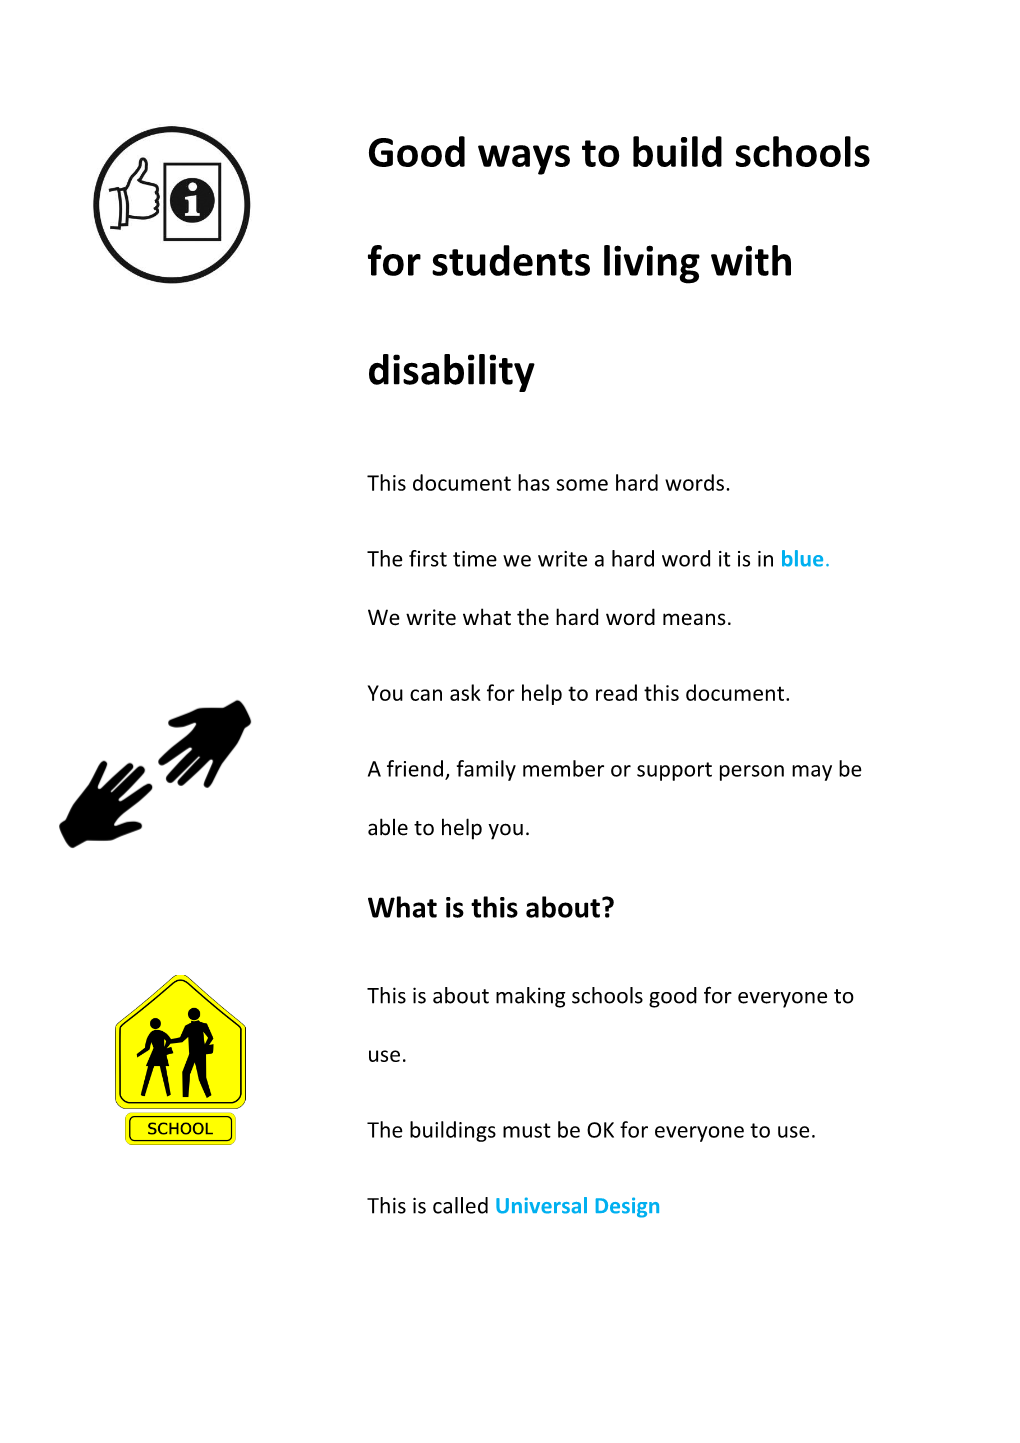 Good Ways to Build Schools for Students Living with Disability